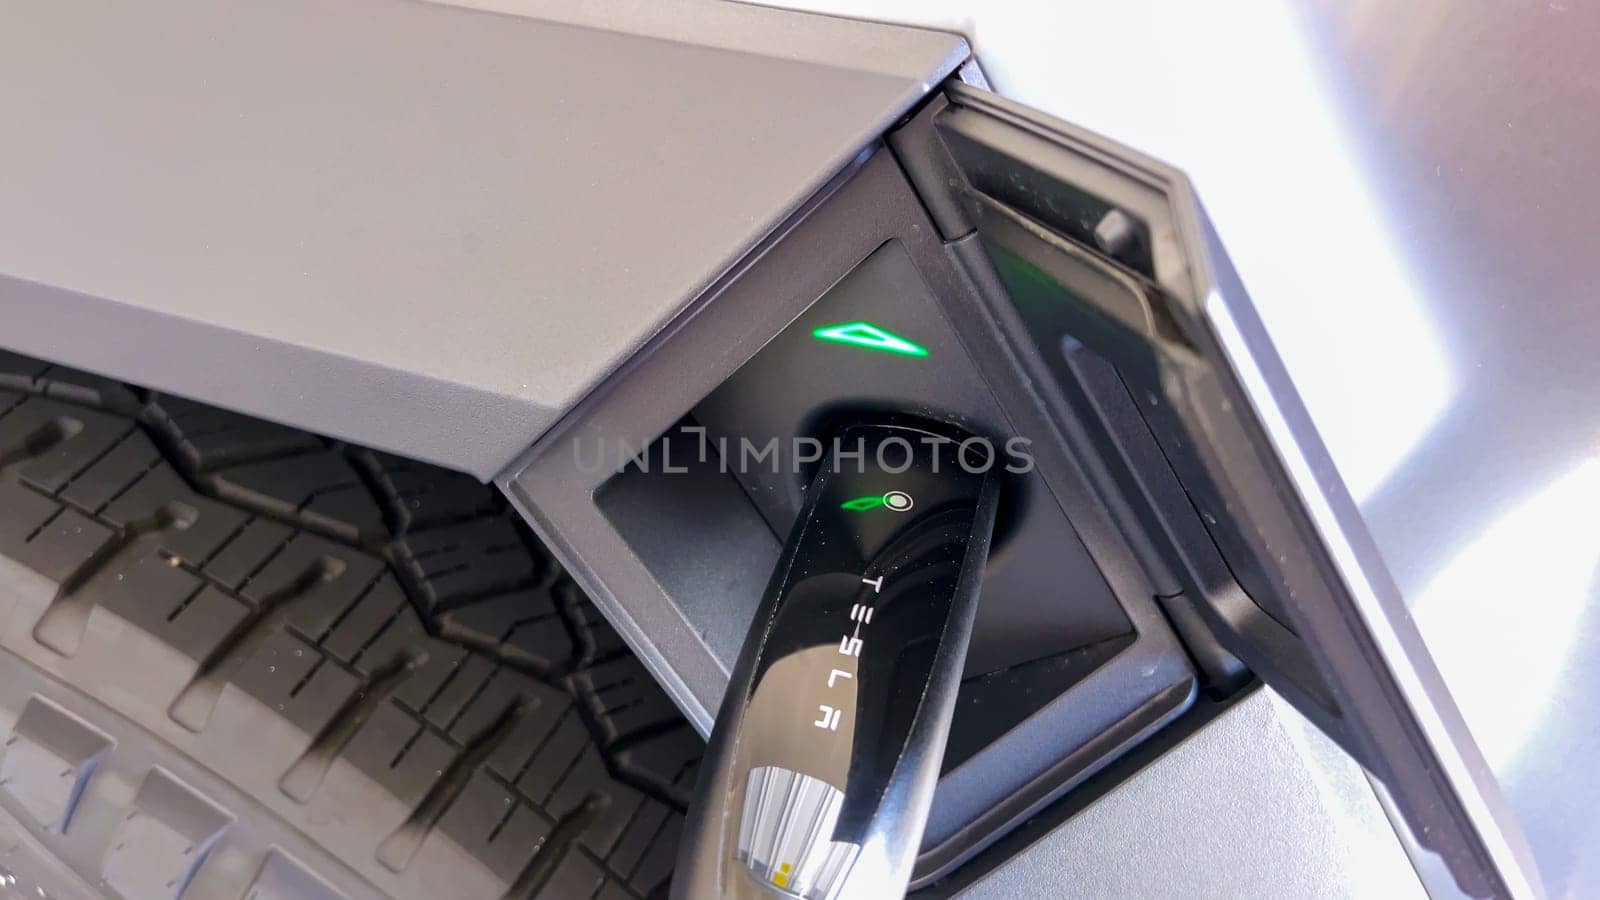 This image showcases the charging connector of a Tesla Cybertruck securely plugged into its port, highlighted by the green indicator lights, signifying active charging status in a close-up view.